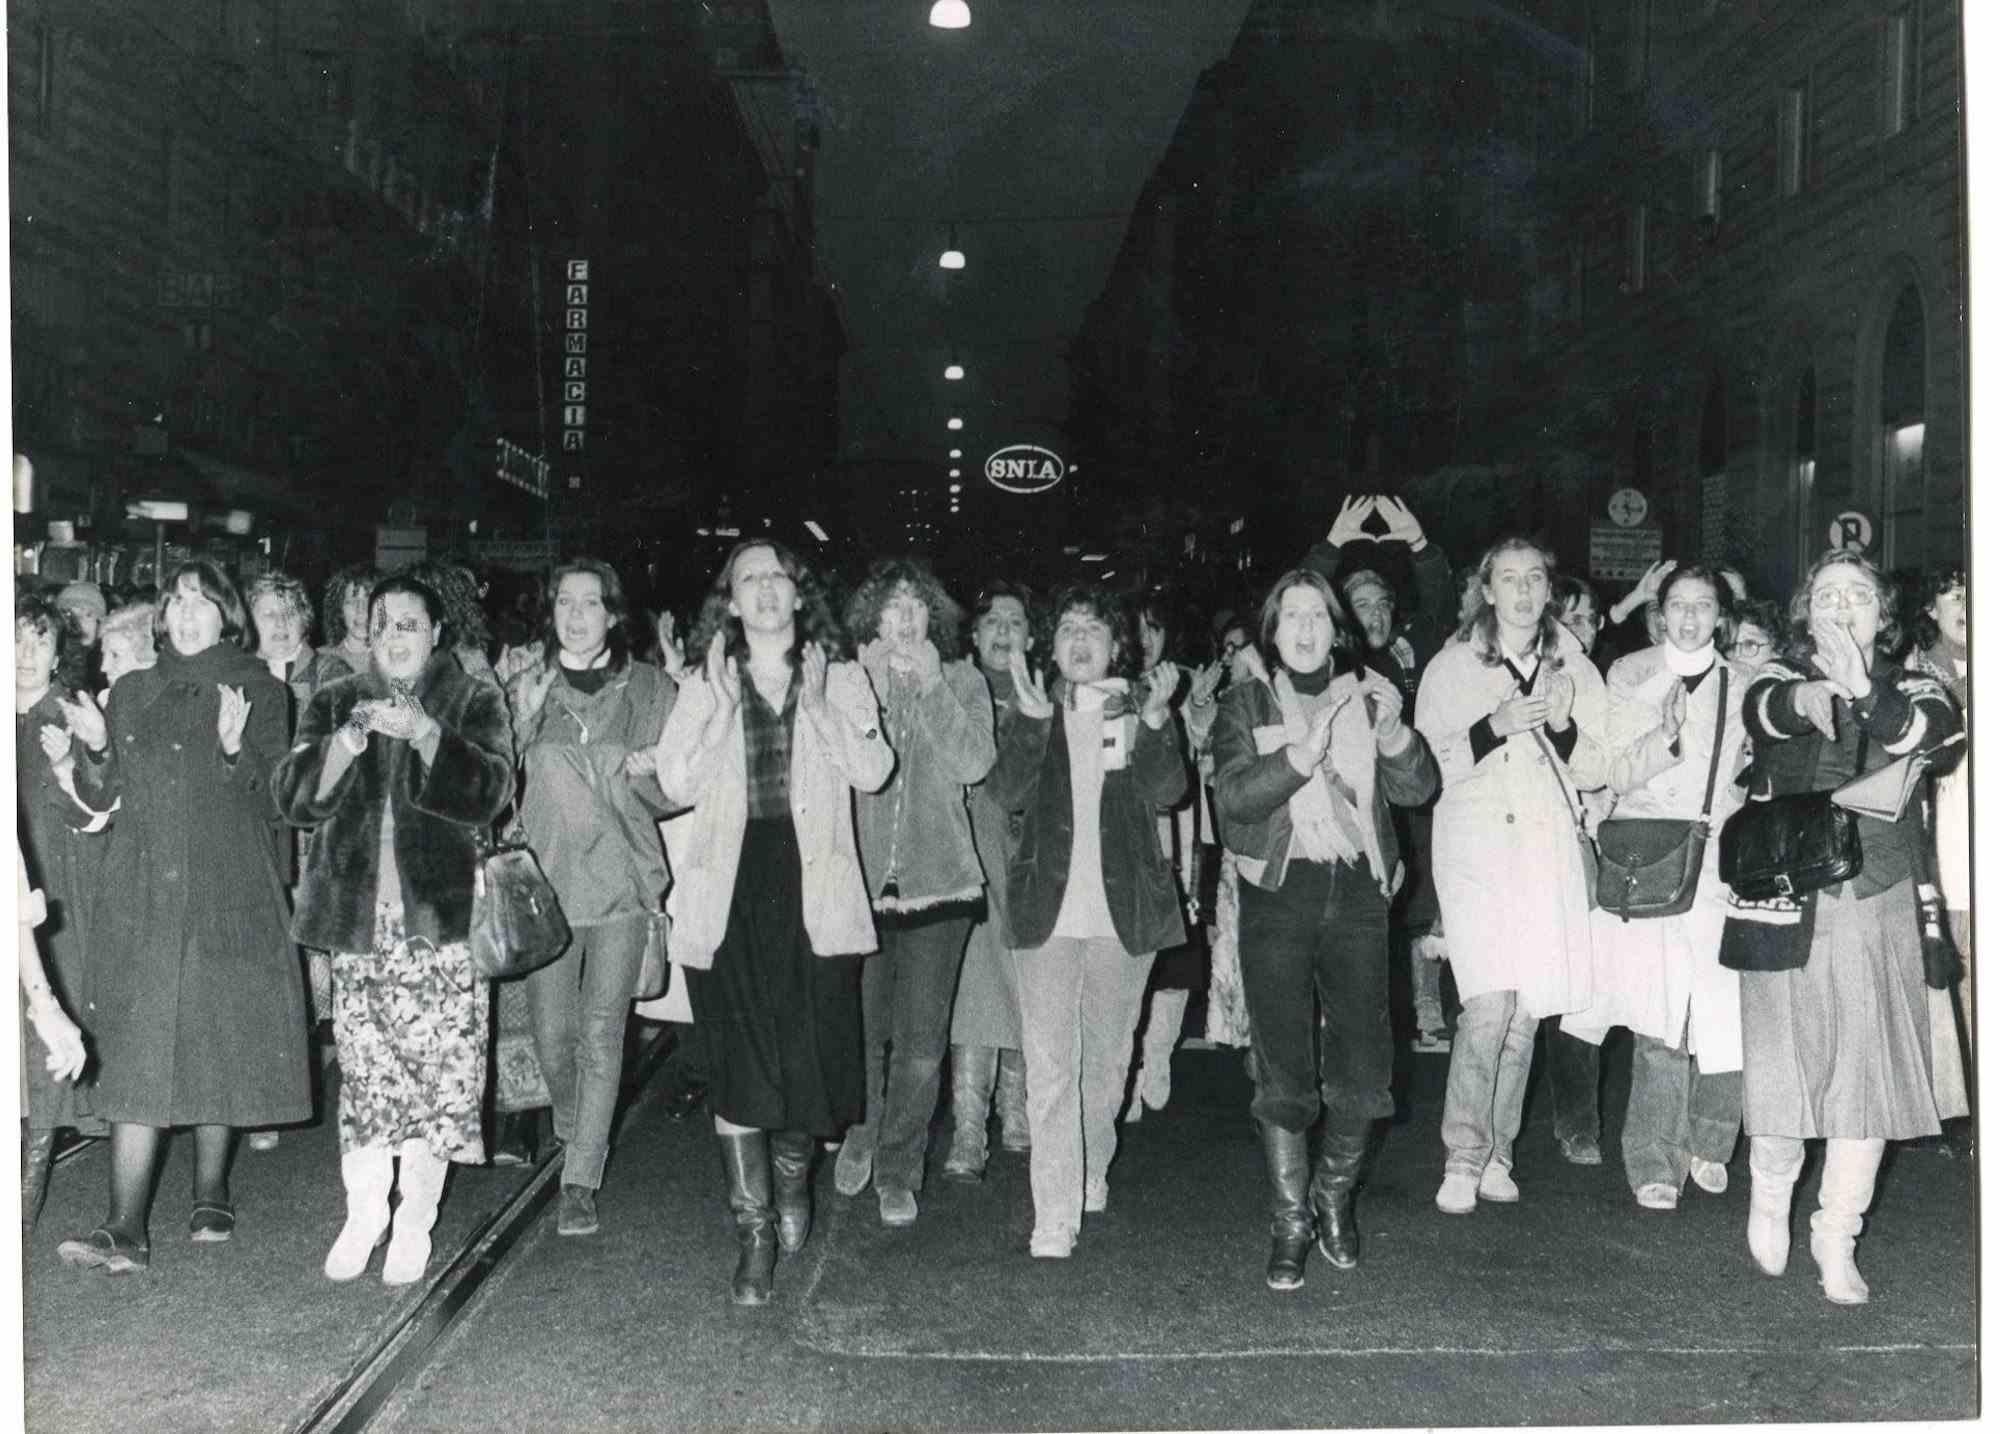 Unknown Black and White Photograph - The Protest - Historical Photograph About the Feminist Movement - 1978